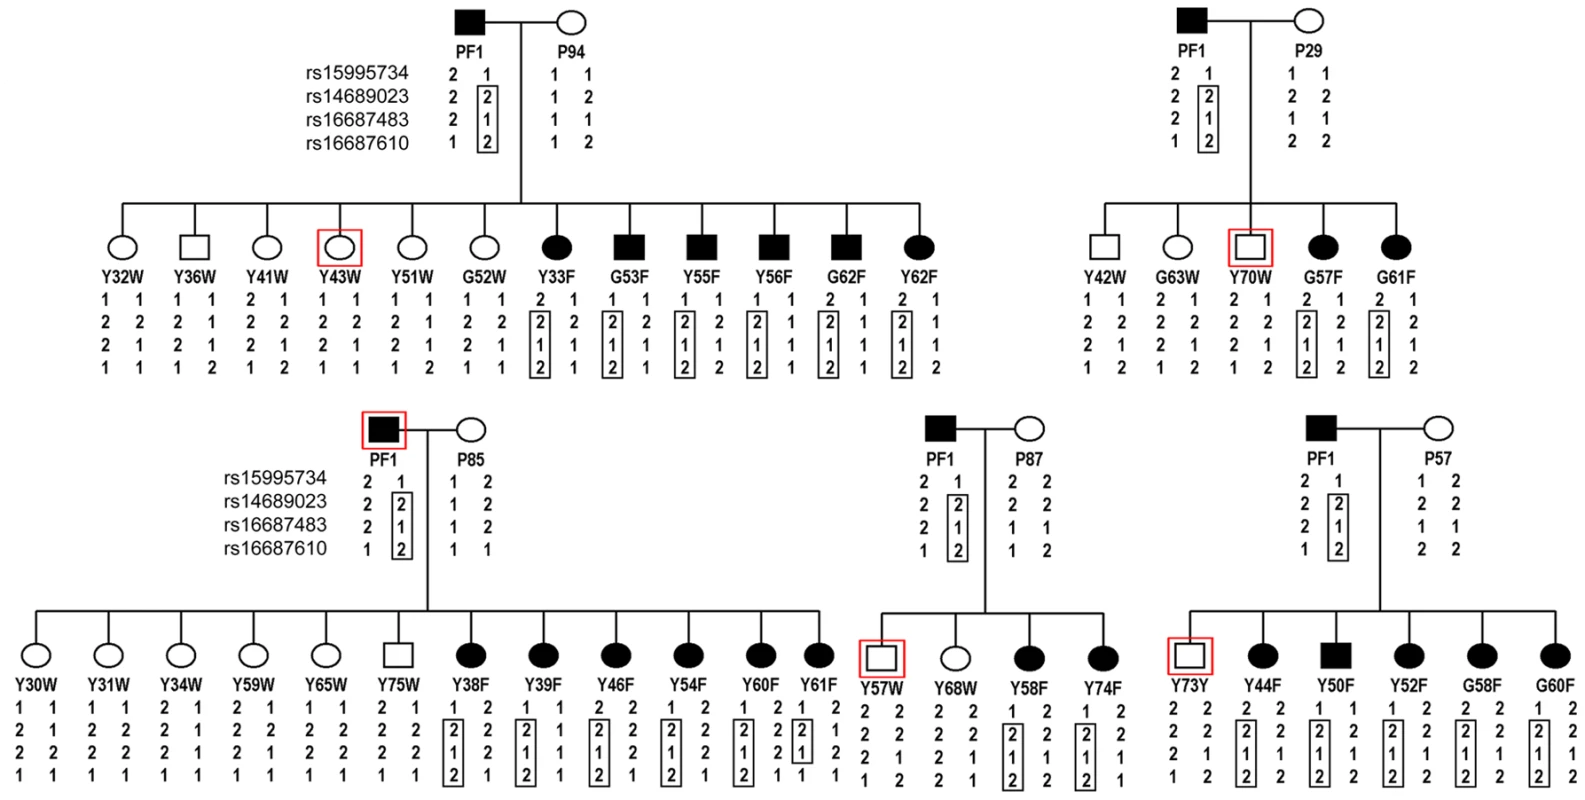 Pedigrees of frizzle chickens used for mapping of the frizzle locus by linkage analysis.